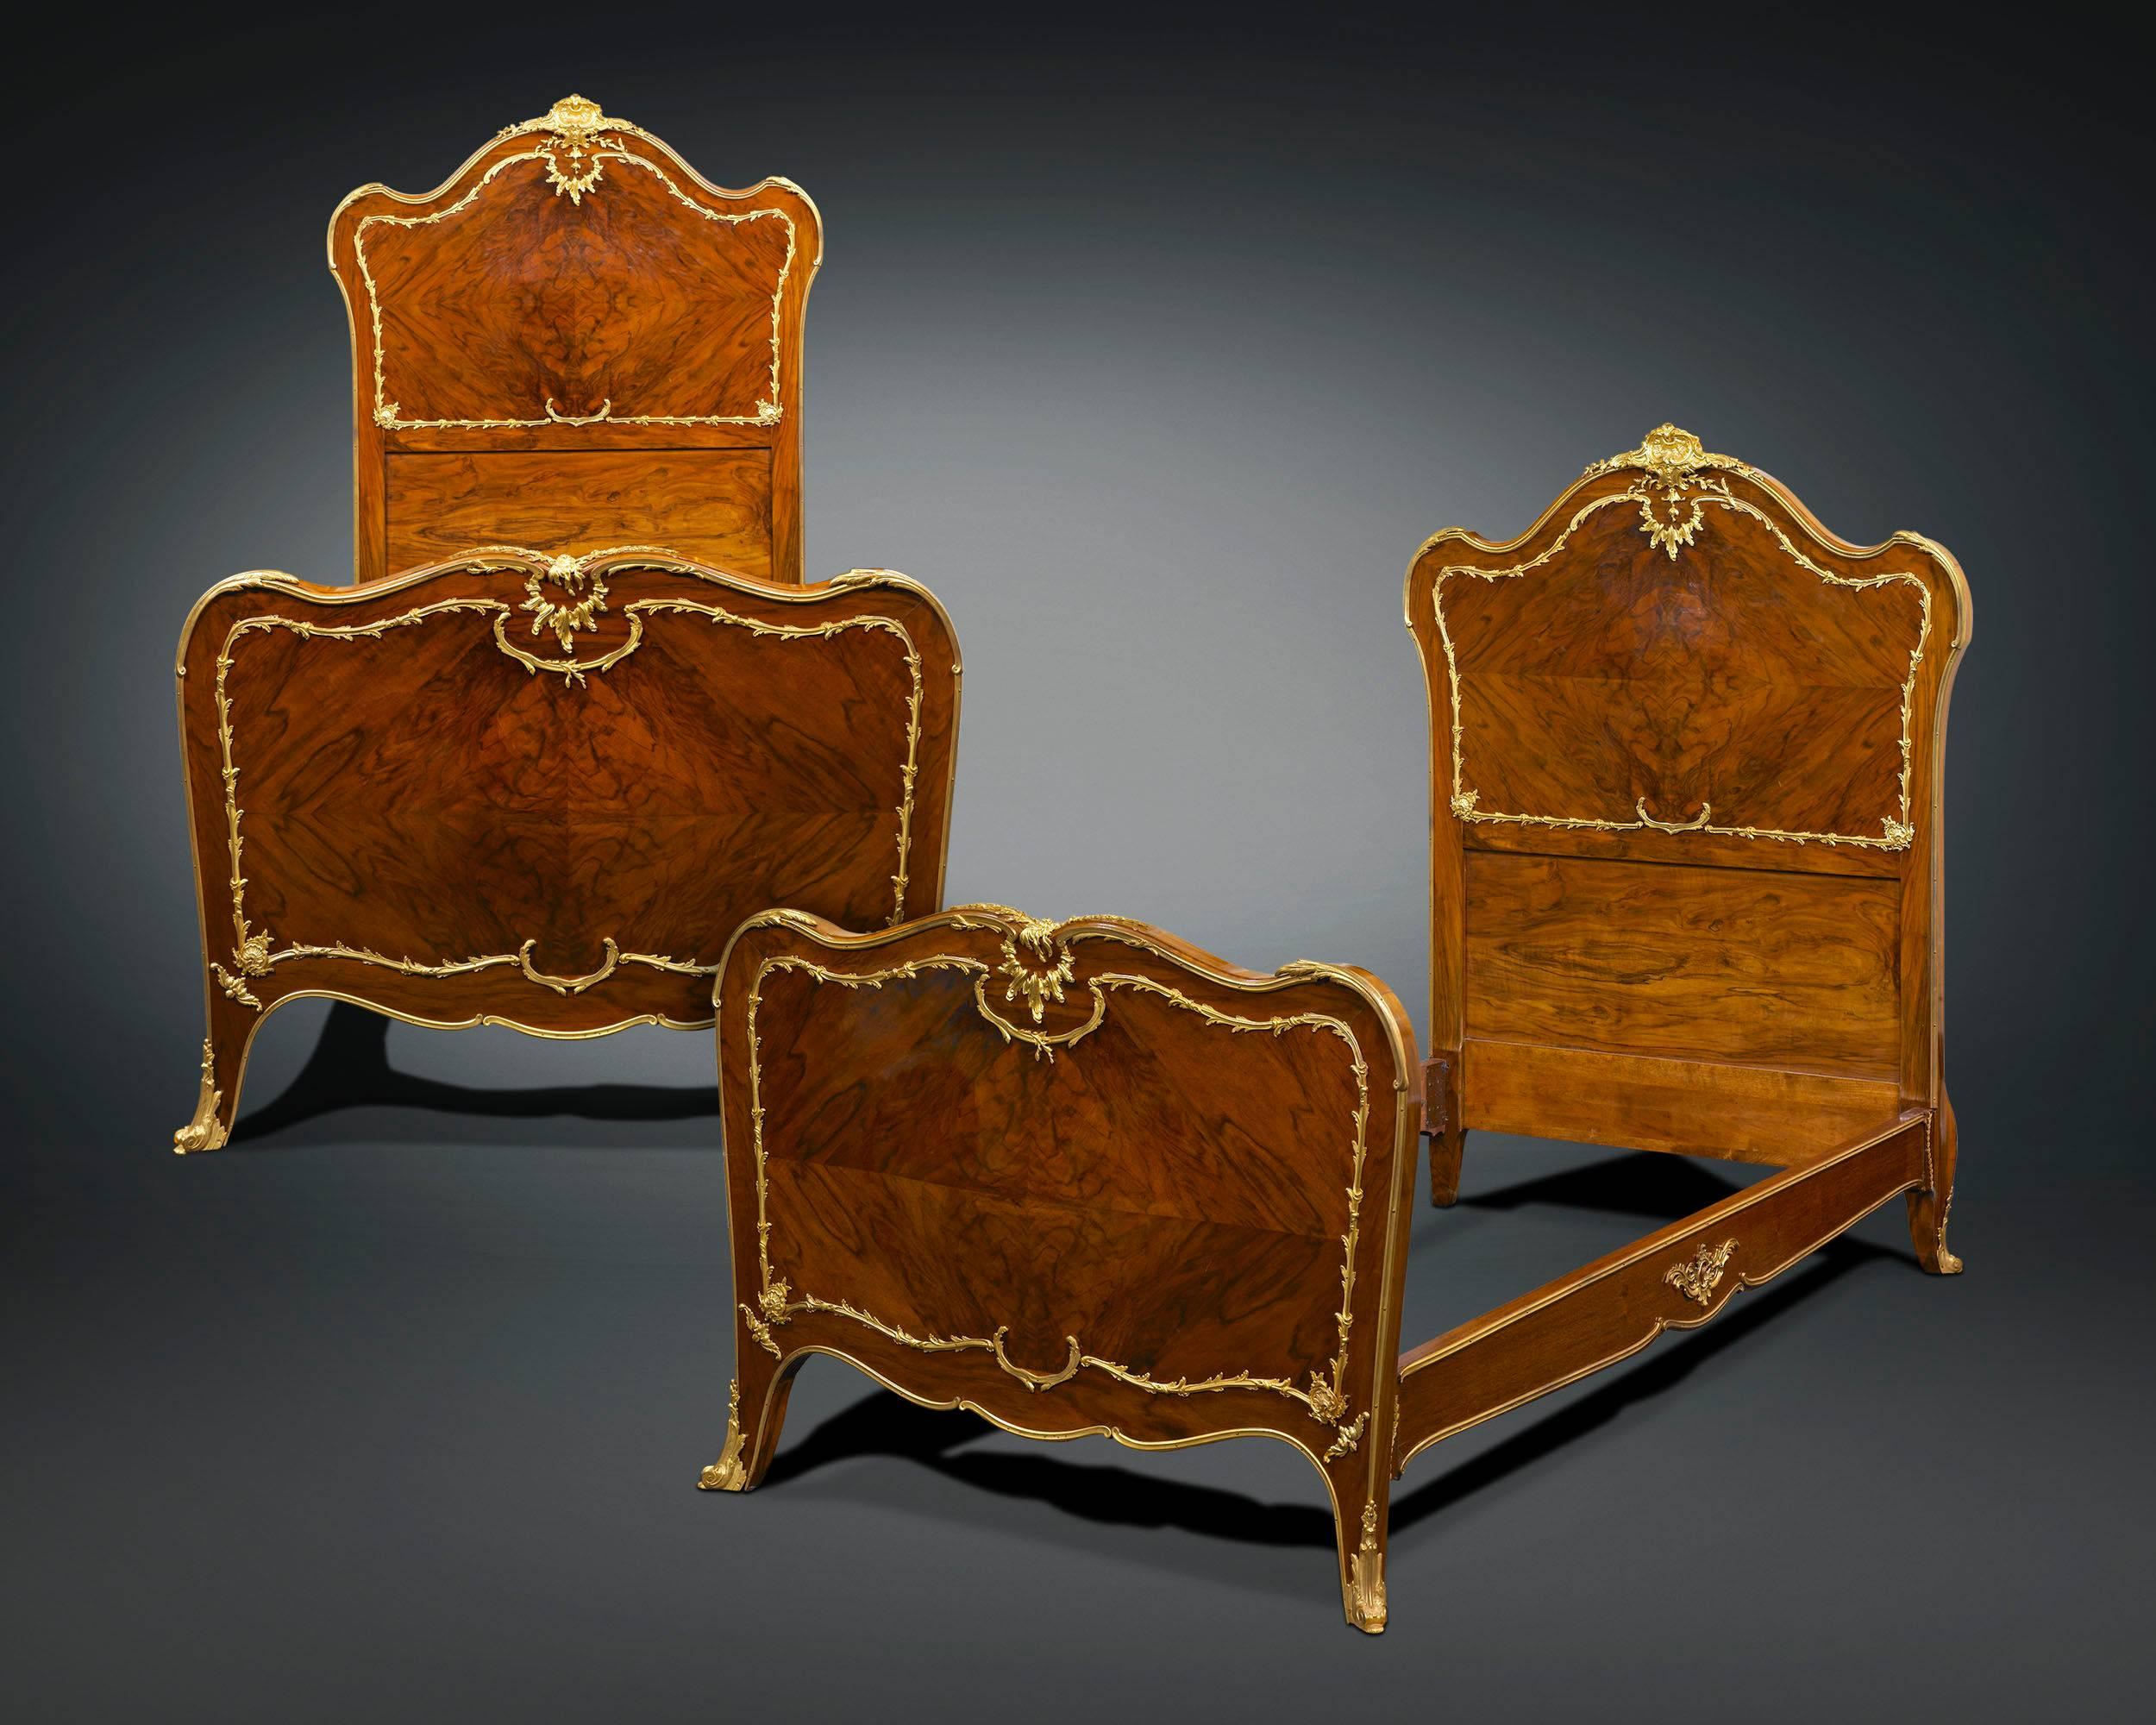 Superior craftsmanship and elegant adornment characterize these exceptional, matching pair of mahogany twin beds by François Linke, the most influential and distinguished French ébéniste of his time. Credited for designing highly innovative